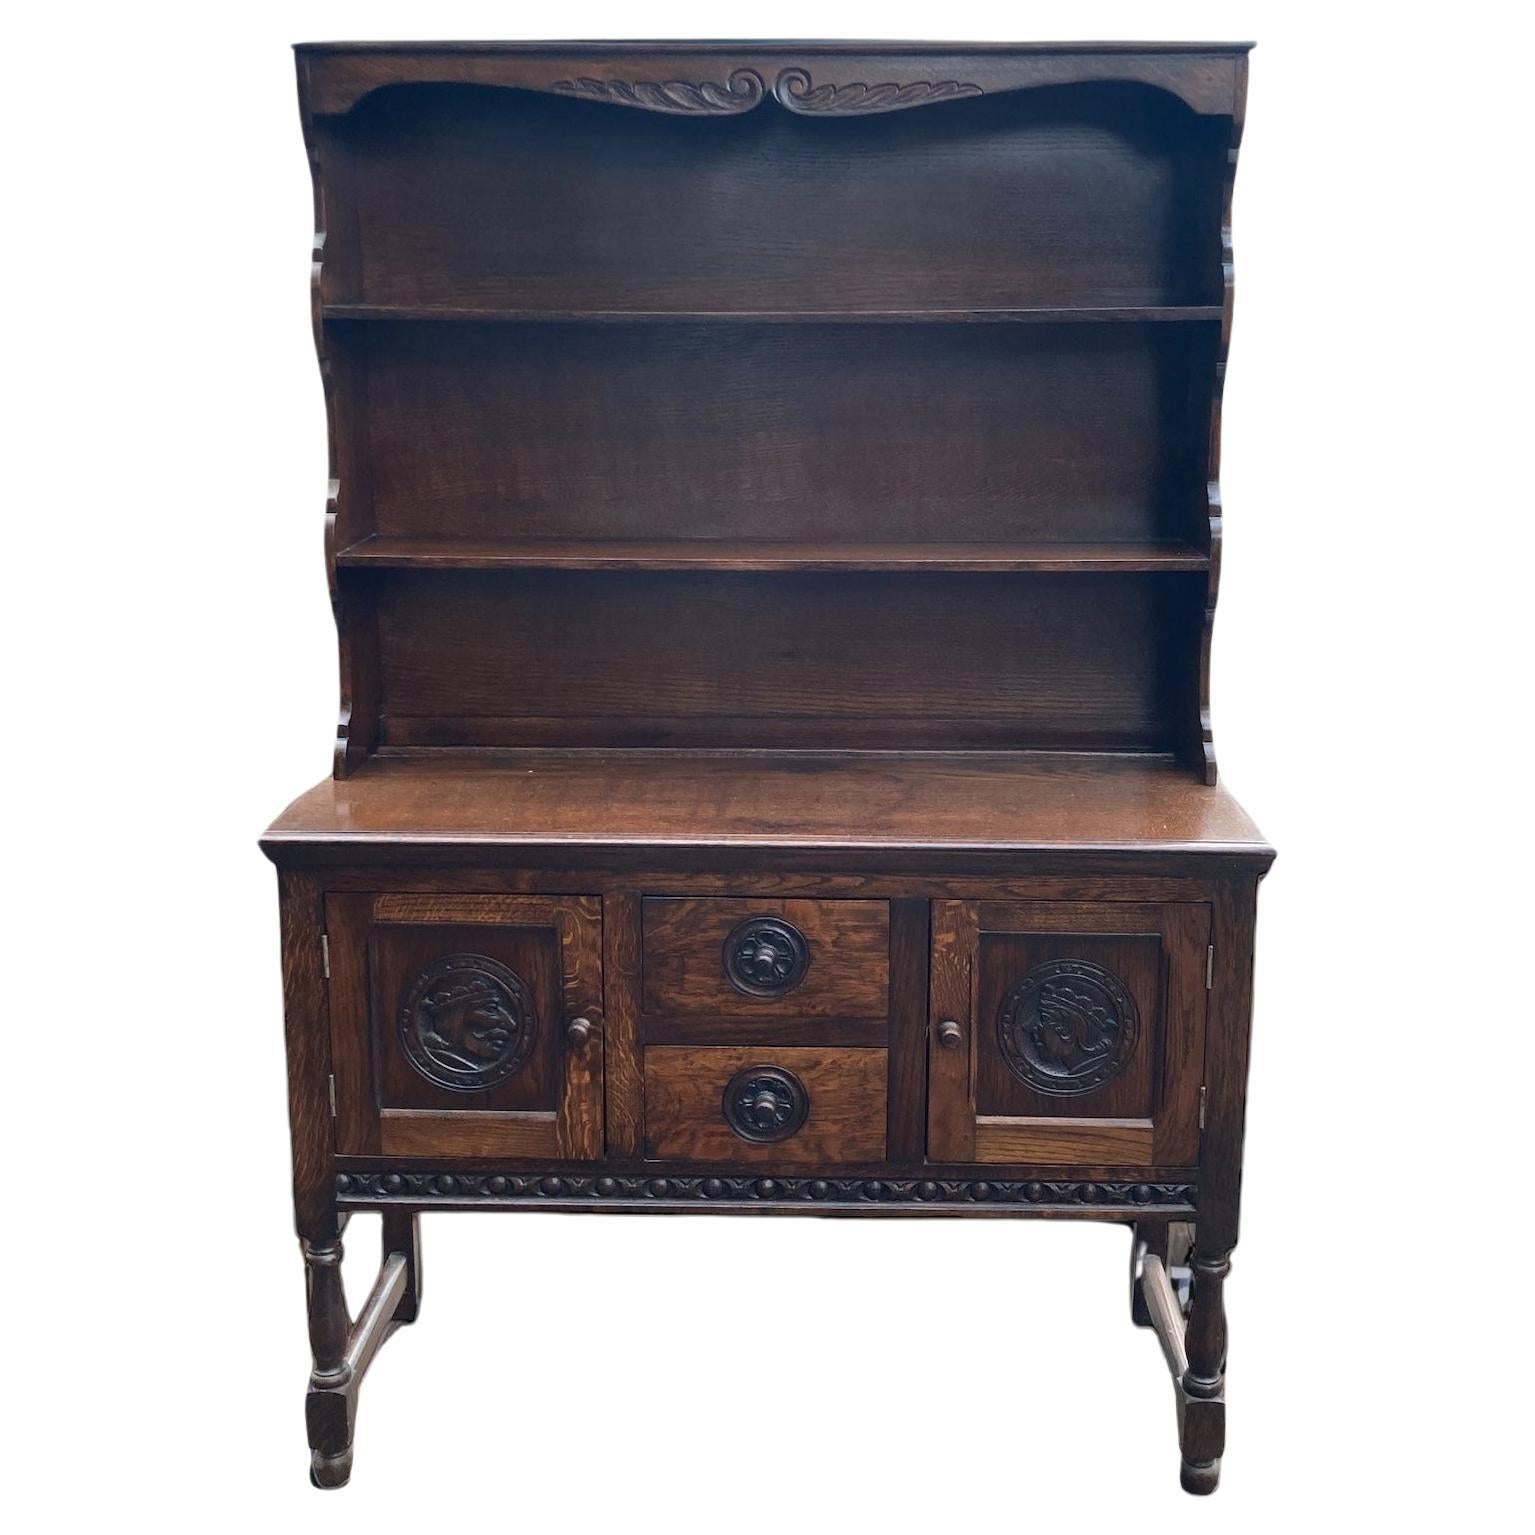 Why is it called a Welsh dresser?